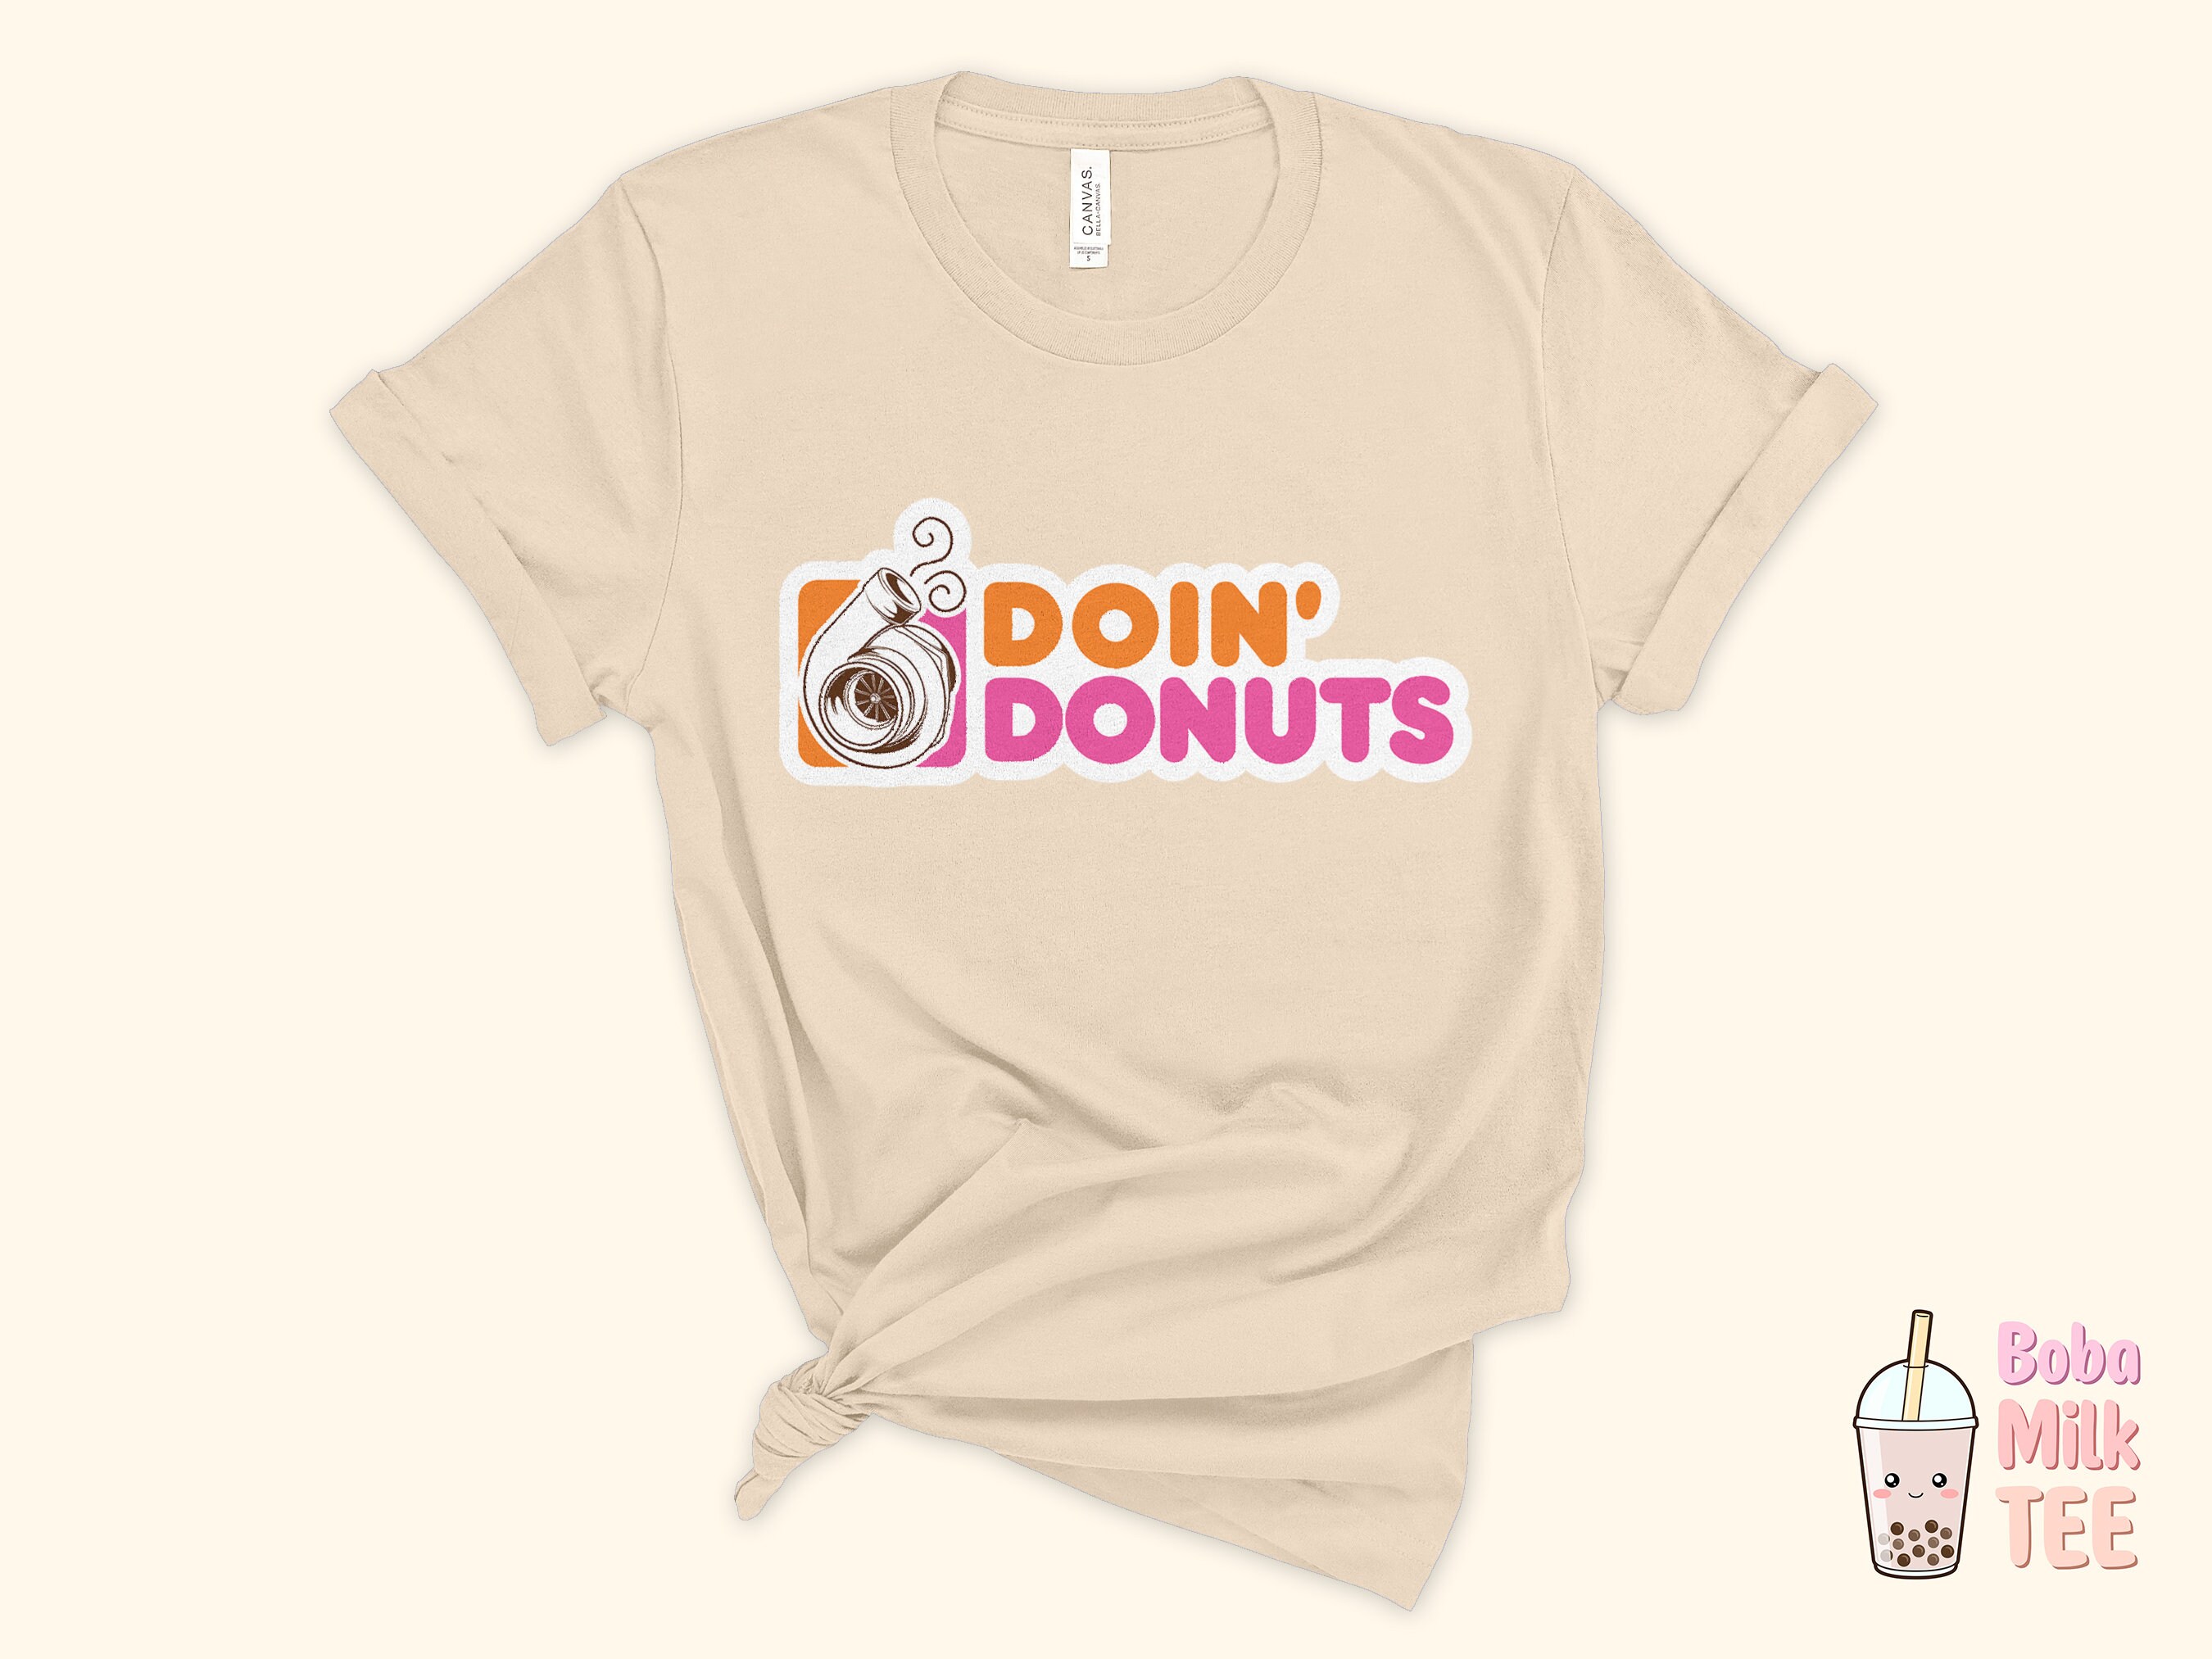 Discover Doin' Donuts Funny Punny Turbo Shirt Gift Humorous Puns Quote Saying T-Shirt